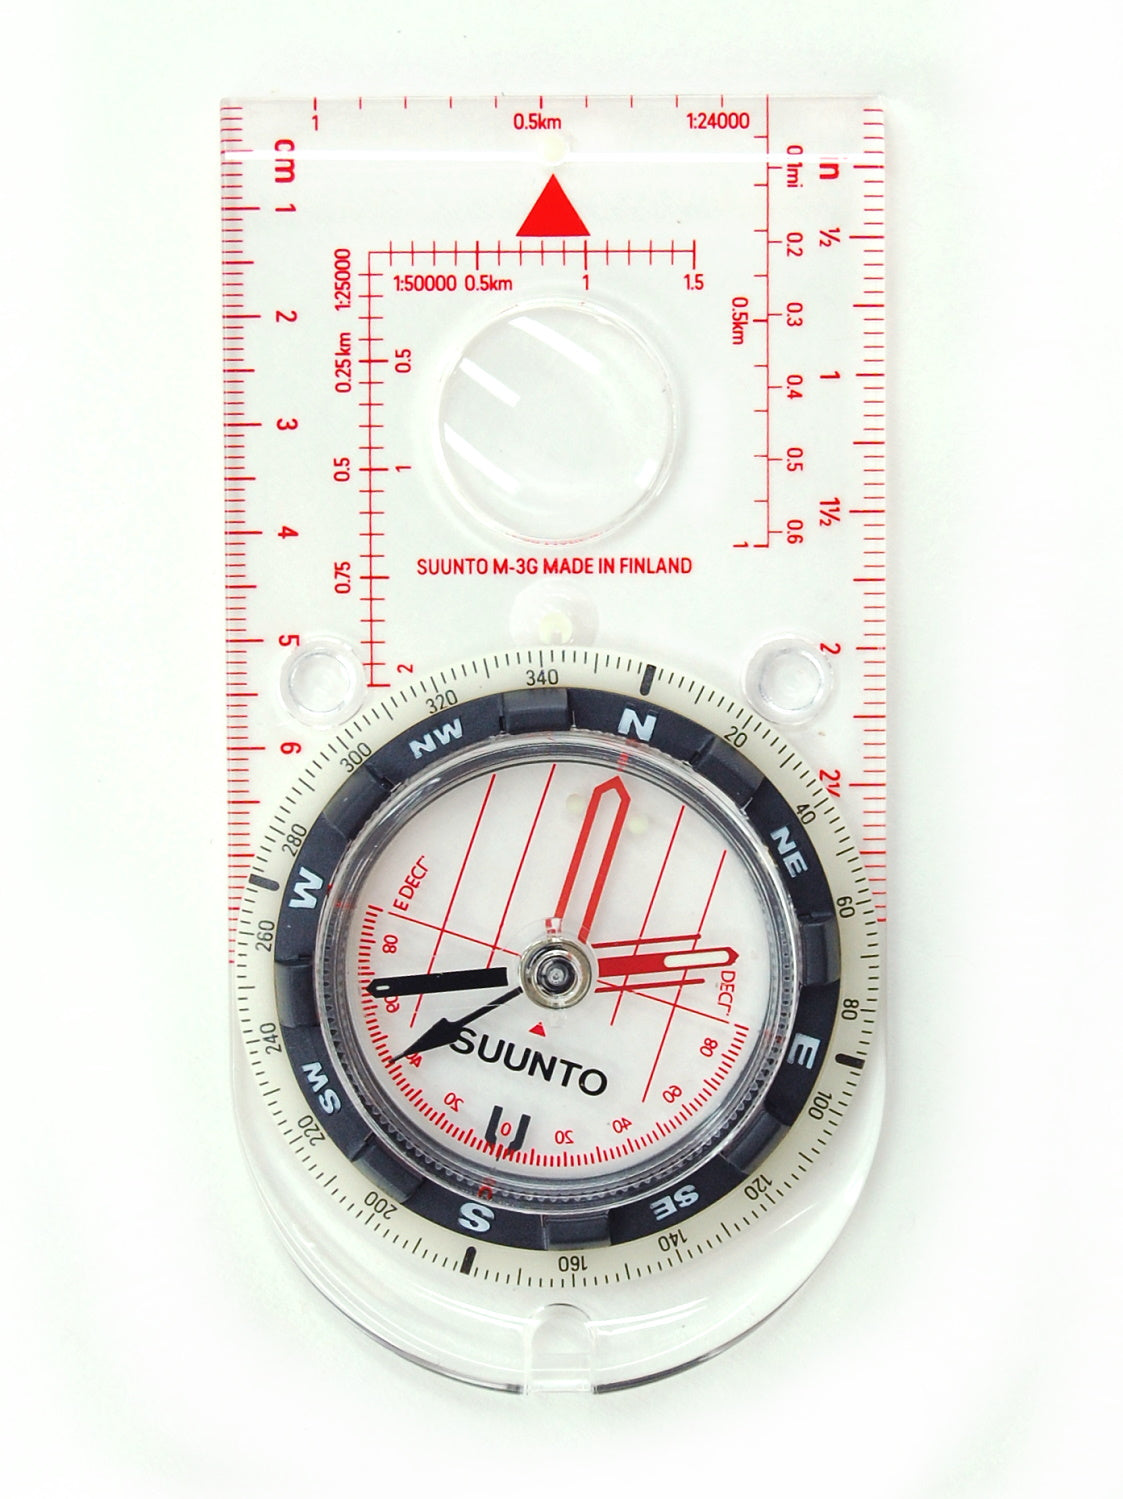 Suunto M-3G Global Compass - top down view